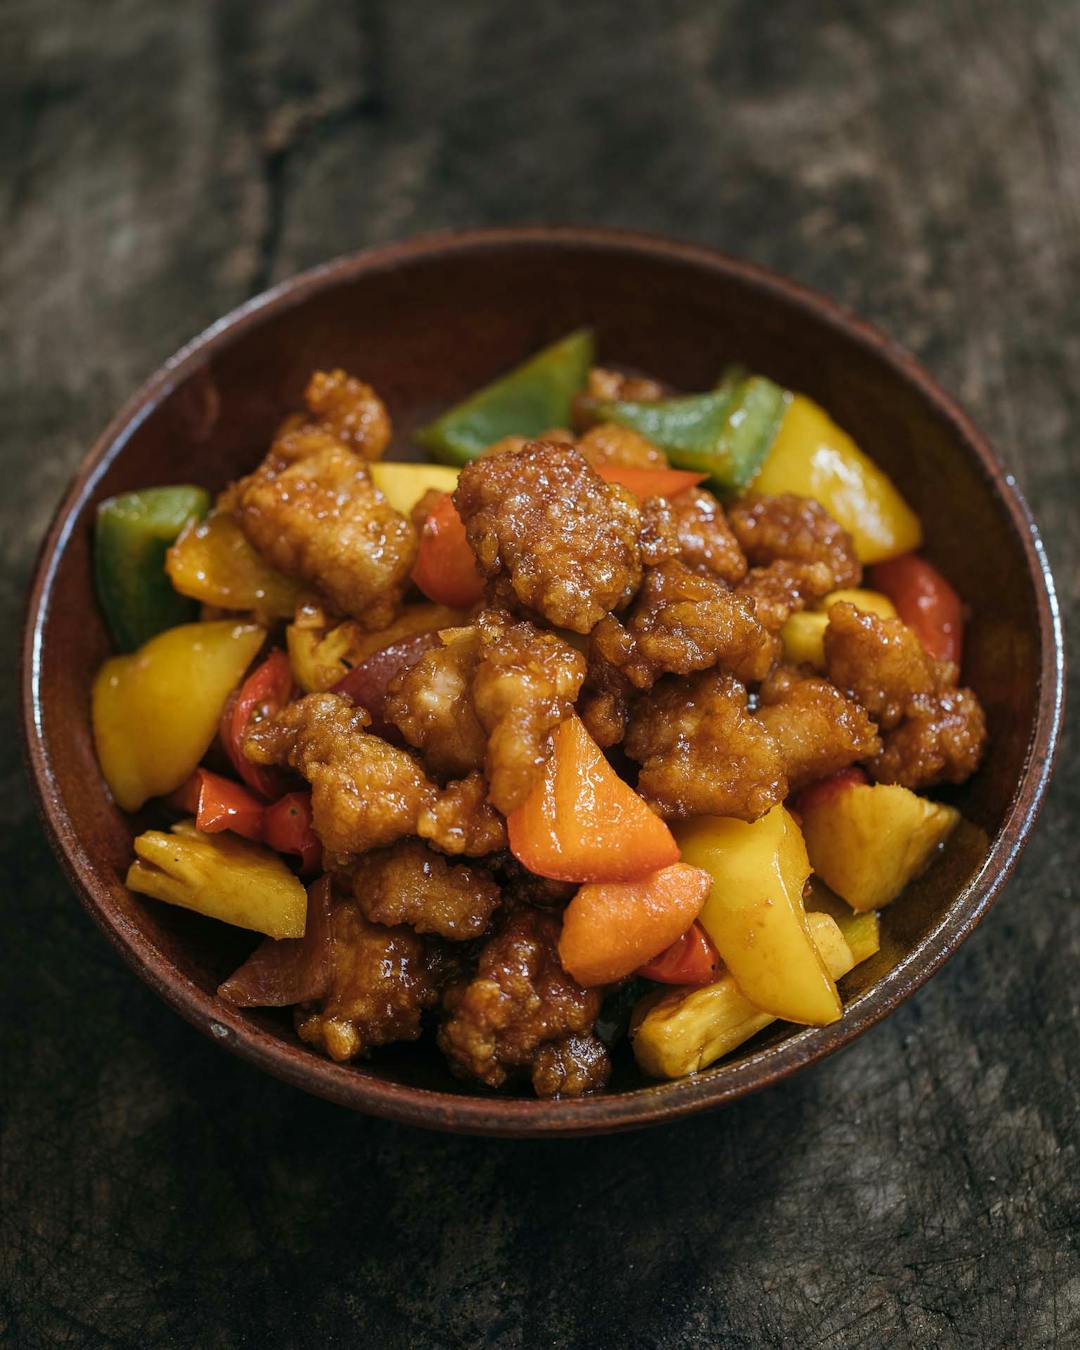 How to Make Sweet and Sour Pork